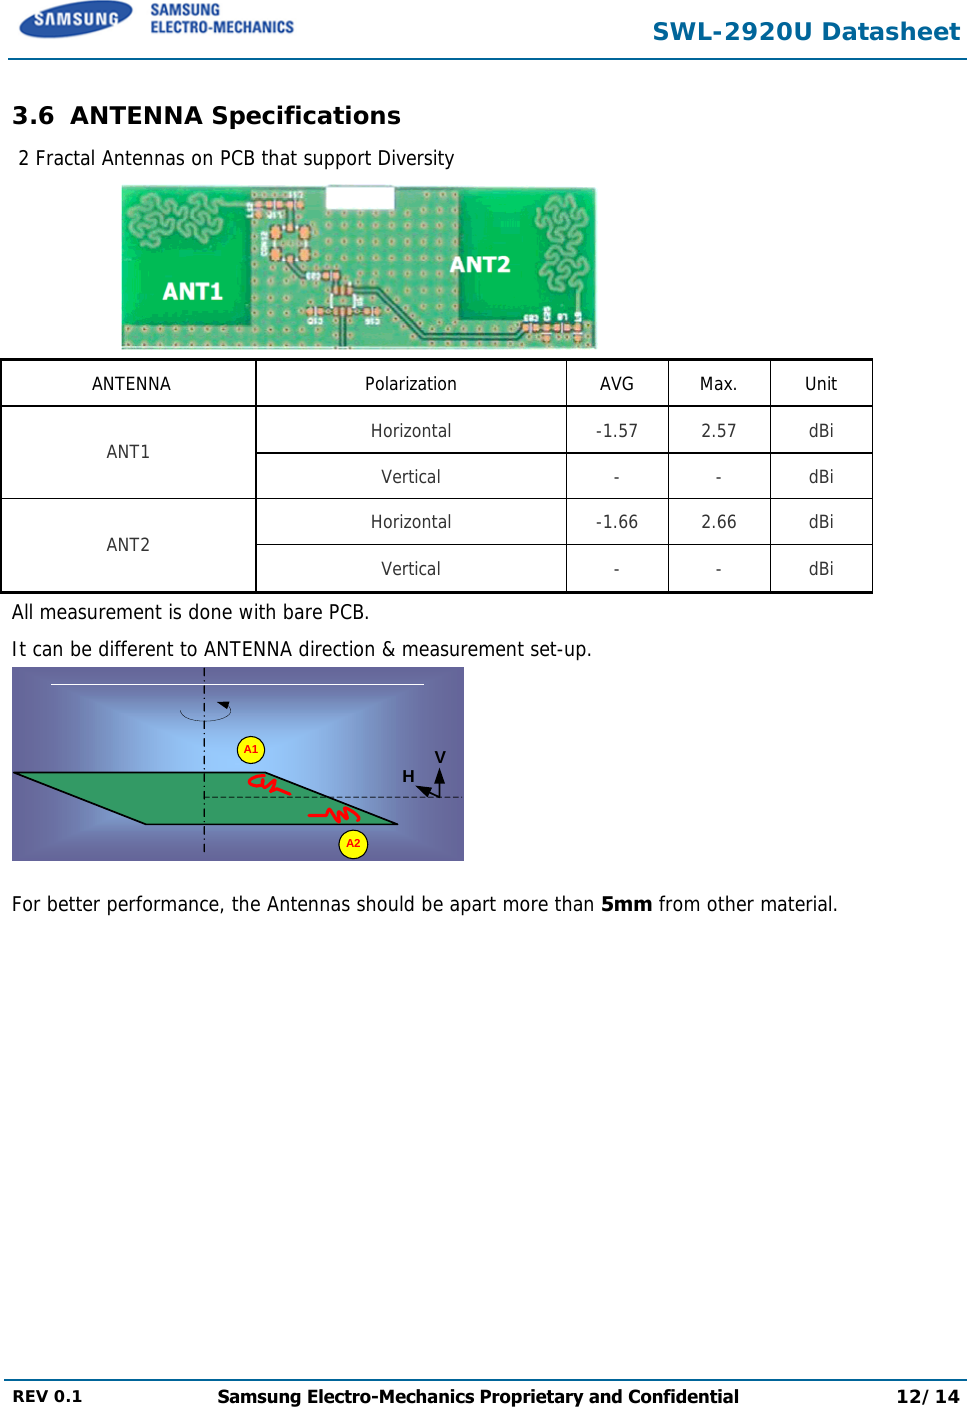  SWL-2920U Datasheet  REV 0.1  Samsung Electro-Mechanics Proprietary and Confidential 12/14  3.6 ANTENNA Specifications  2 Fractal Antennas on PCB that support Diversity   ANTENNA Polarization AVG Max. Unit Horizontal -1.57 2.57 dBi ANT1  Vertical - - dBi Horizontal -1.66 2.66 dBi ANT2  Vertical - - dBi All measurement is done with bare PCB. It can be different to ANTENNA direction &amp; measurement set-up.  For better performance, the Antennas should be apart more than 5mm from other material.   A1A2VH